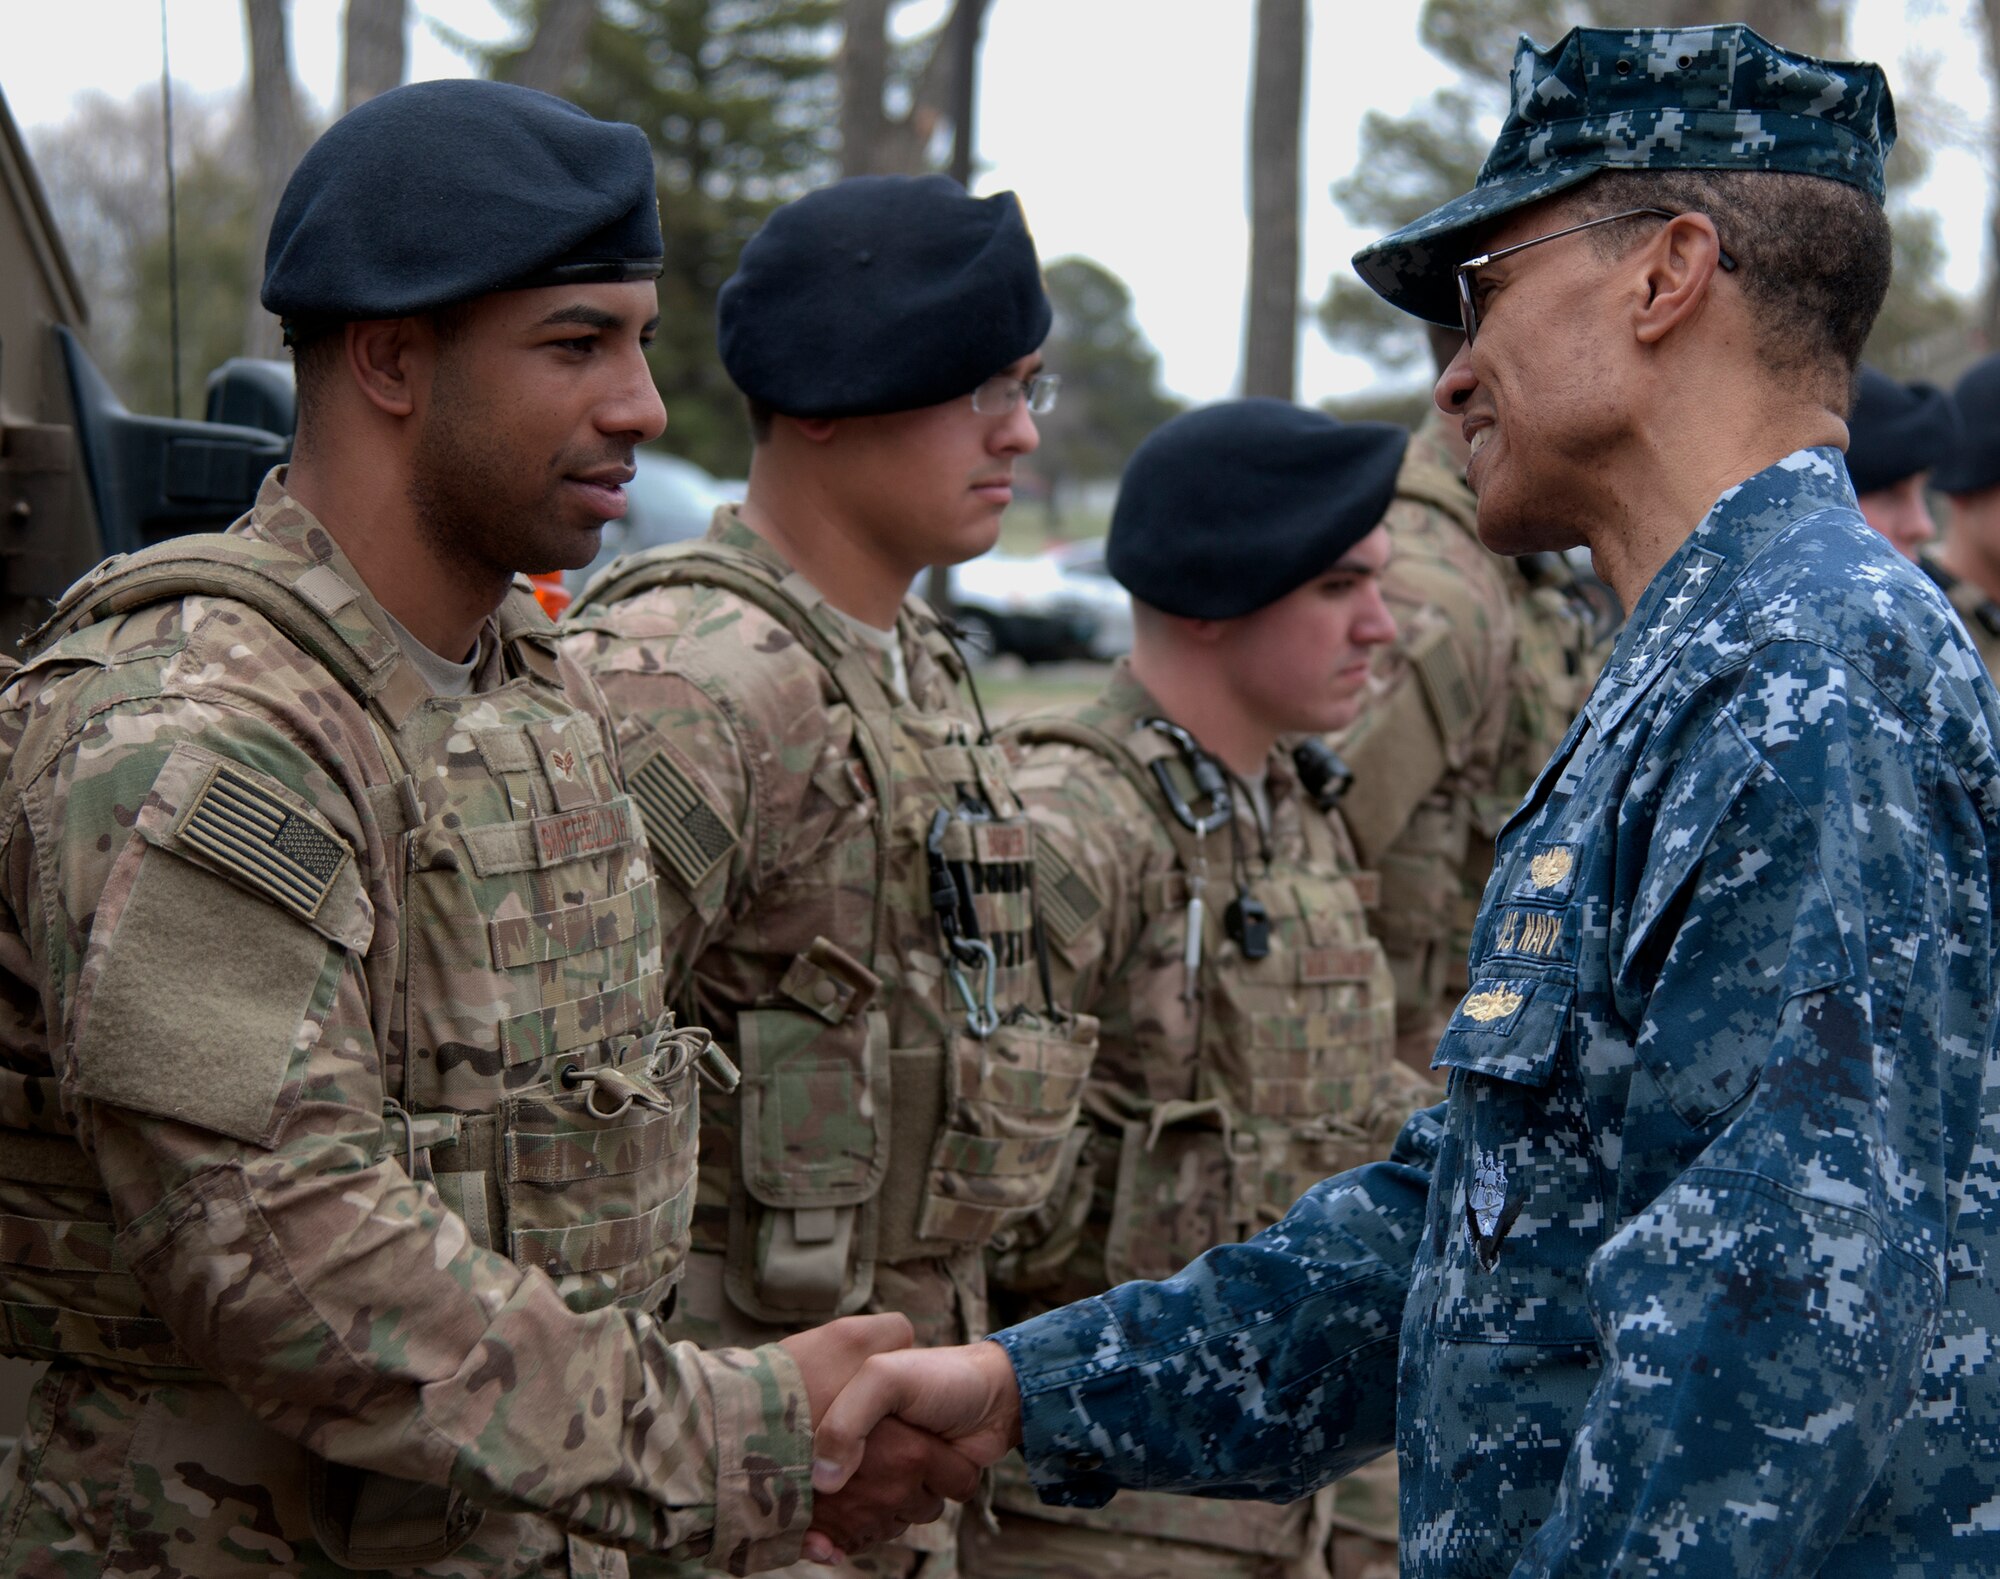 U.S. Navy Adm. Cecil D. Haney, U.S. Strategic Command commander, shakes hands with Senior Airman Shaan Shaffeeullah, 790th Missile Security Forces Squadron convoy response force member, during a visit to F.E. Warren Air Force Base, Wyo., April 28, 2015. Haney traveled to F.E. Warren to see firsthand the men and women performing the ICBM mission 24/7, 365, and to chair the Intercontinental Ballistic Missile Stakeholders meeting, one of several such meetings that will be held this year. USSTRATCOM is one of nine DoD unified combatant commands and is charged with strategic deterrence; space operations; cyberspace operations; joint electronic warfare; global strike; missile defense; intelligence, surveillance and reconnaissance; combating weapons of mass destruction; and analysis and targeting. (U.S. Air Force photo by Airman 1st Class Brandon Valle)